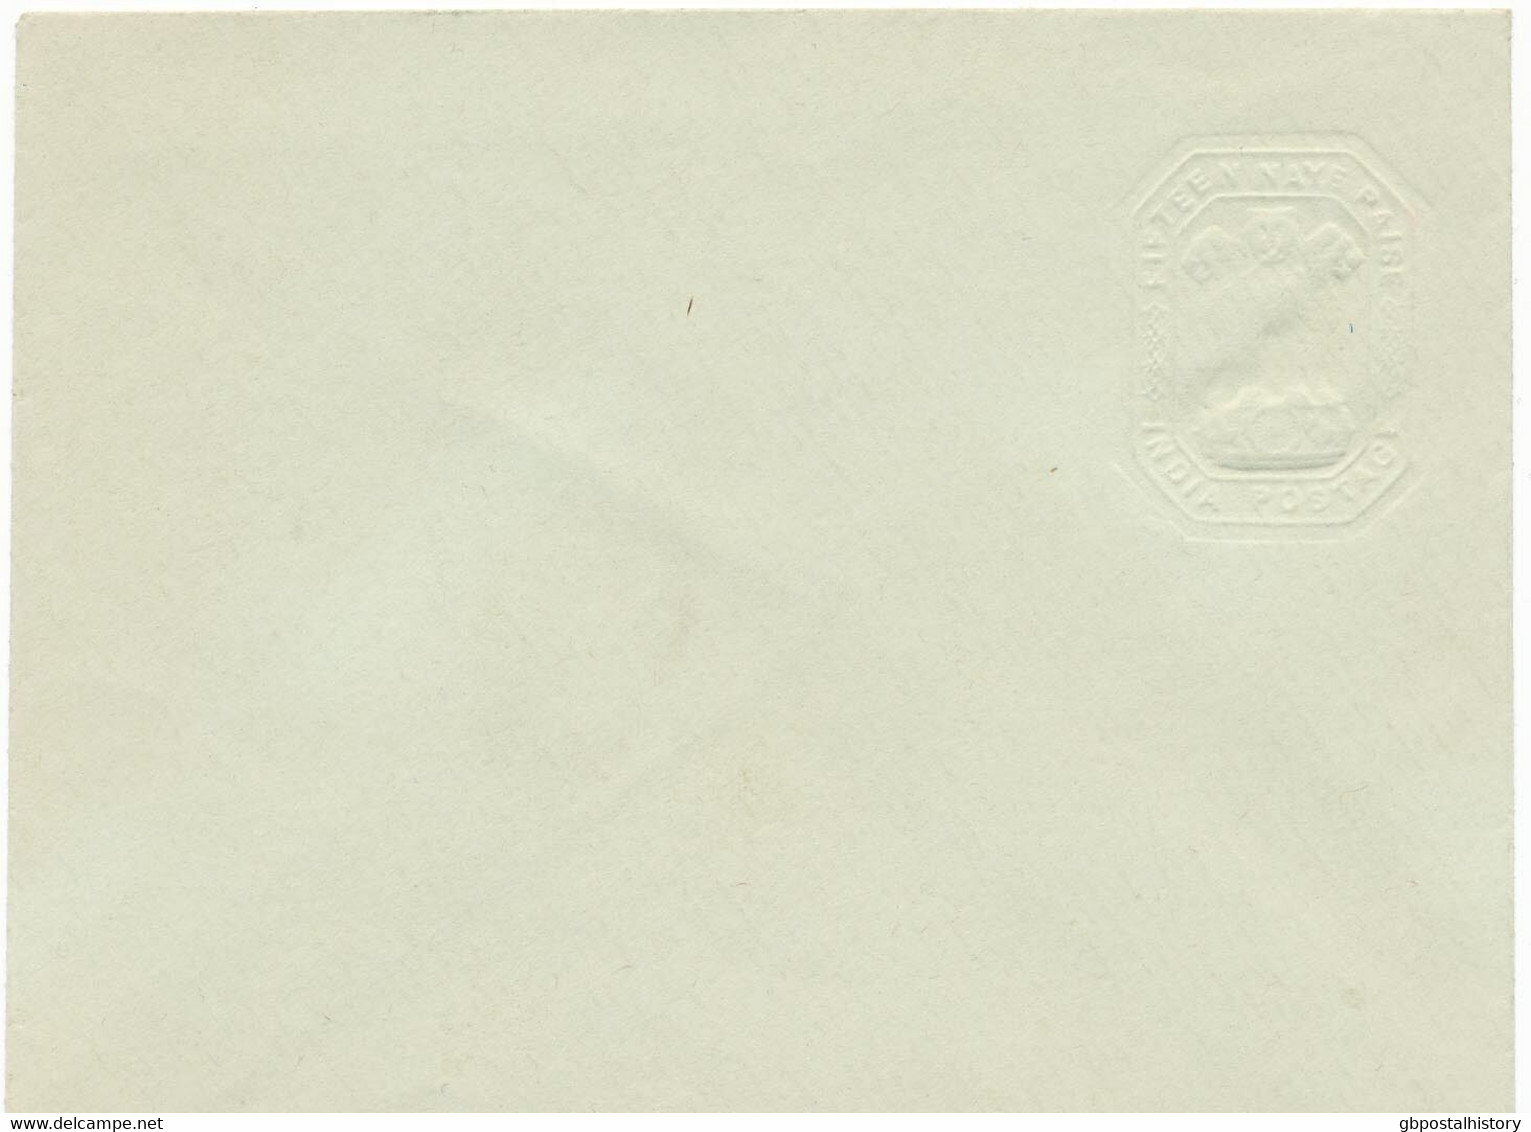 INDIA 1950 Postal Stationery Envelope H&G B24 Mint VARIETY MISSING RED COLOUR - Plaatfouten En Curiosa